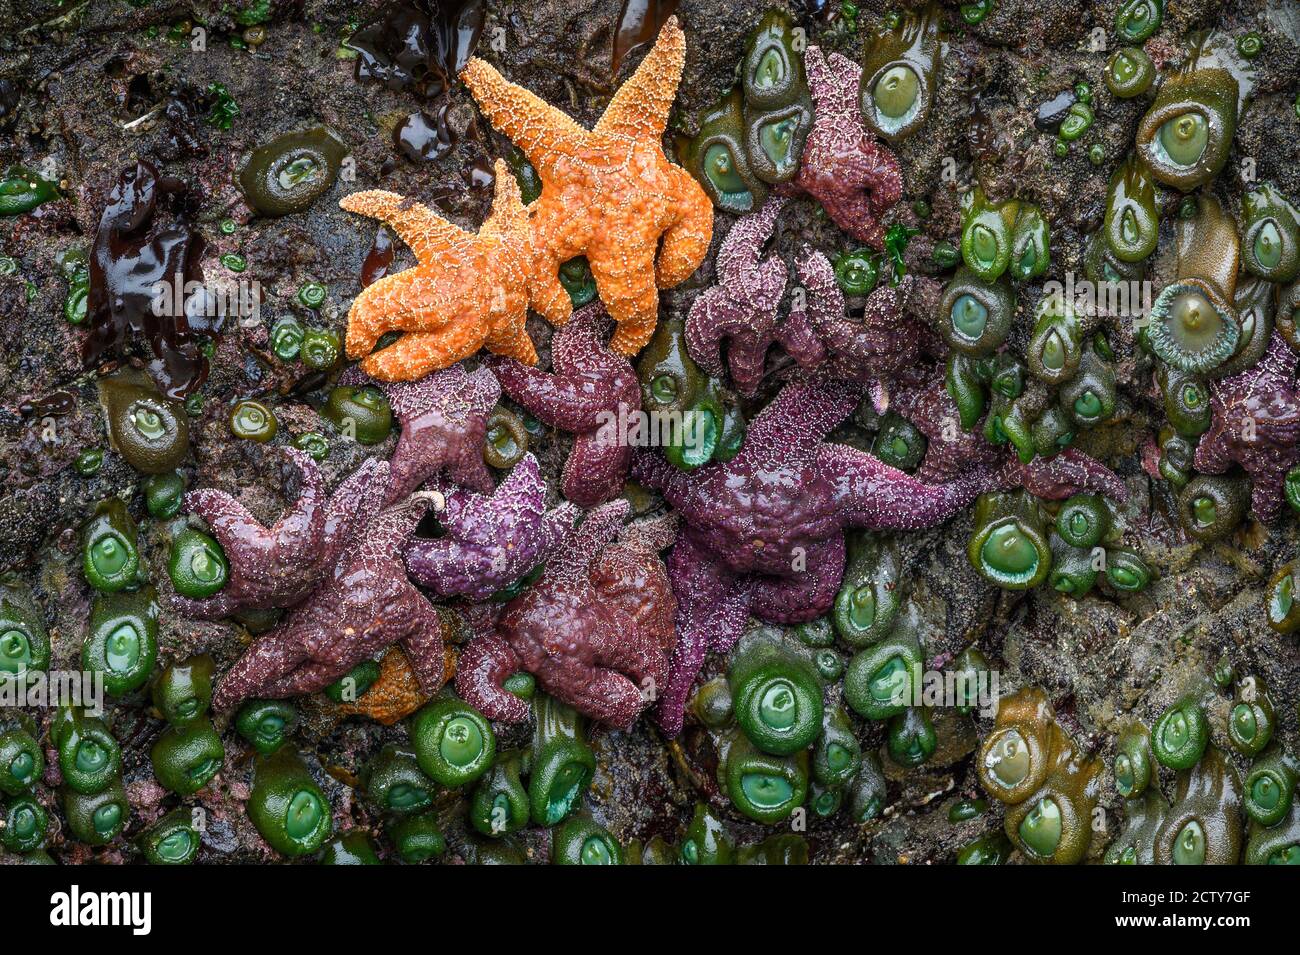 Sea stars and anemones revealed at low tide on the rocks at Myers Creek Area of Pistol River State Park, Southern Oregon Coast. Stock Photo